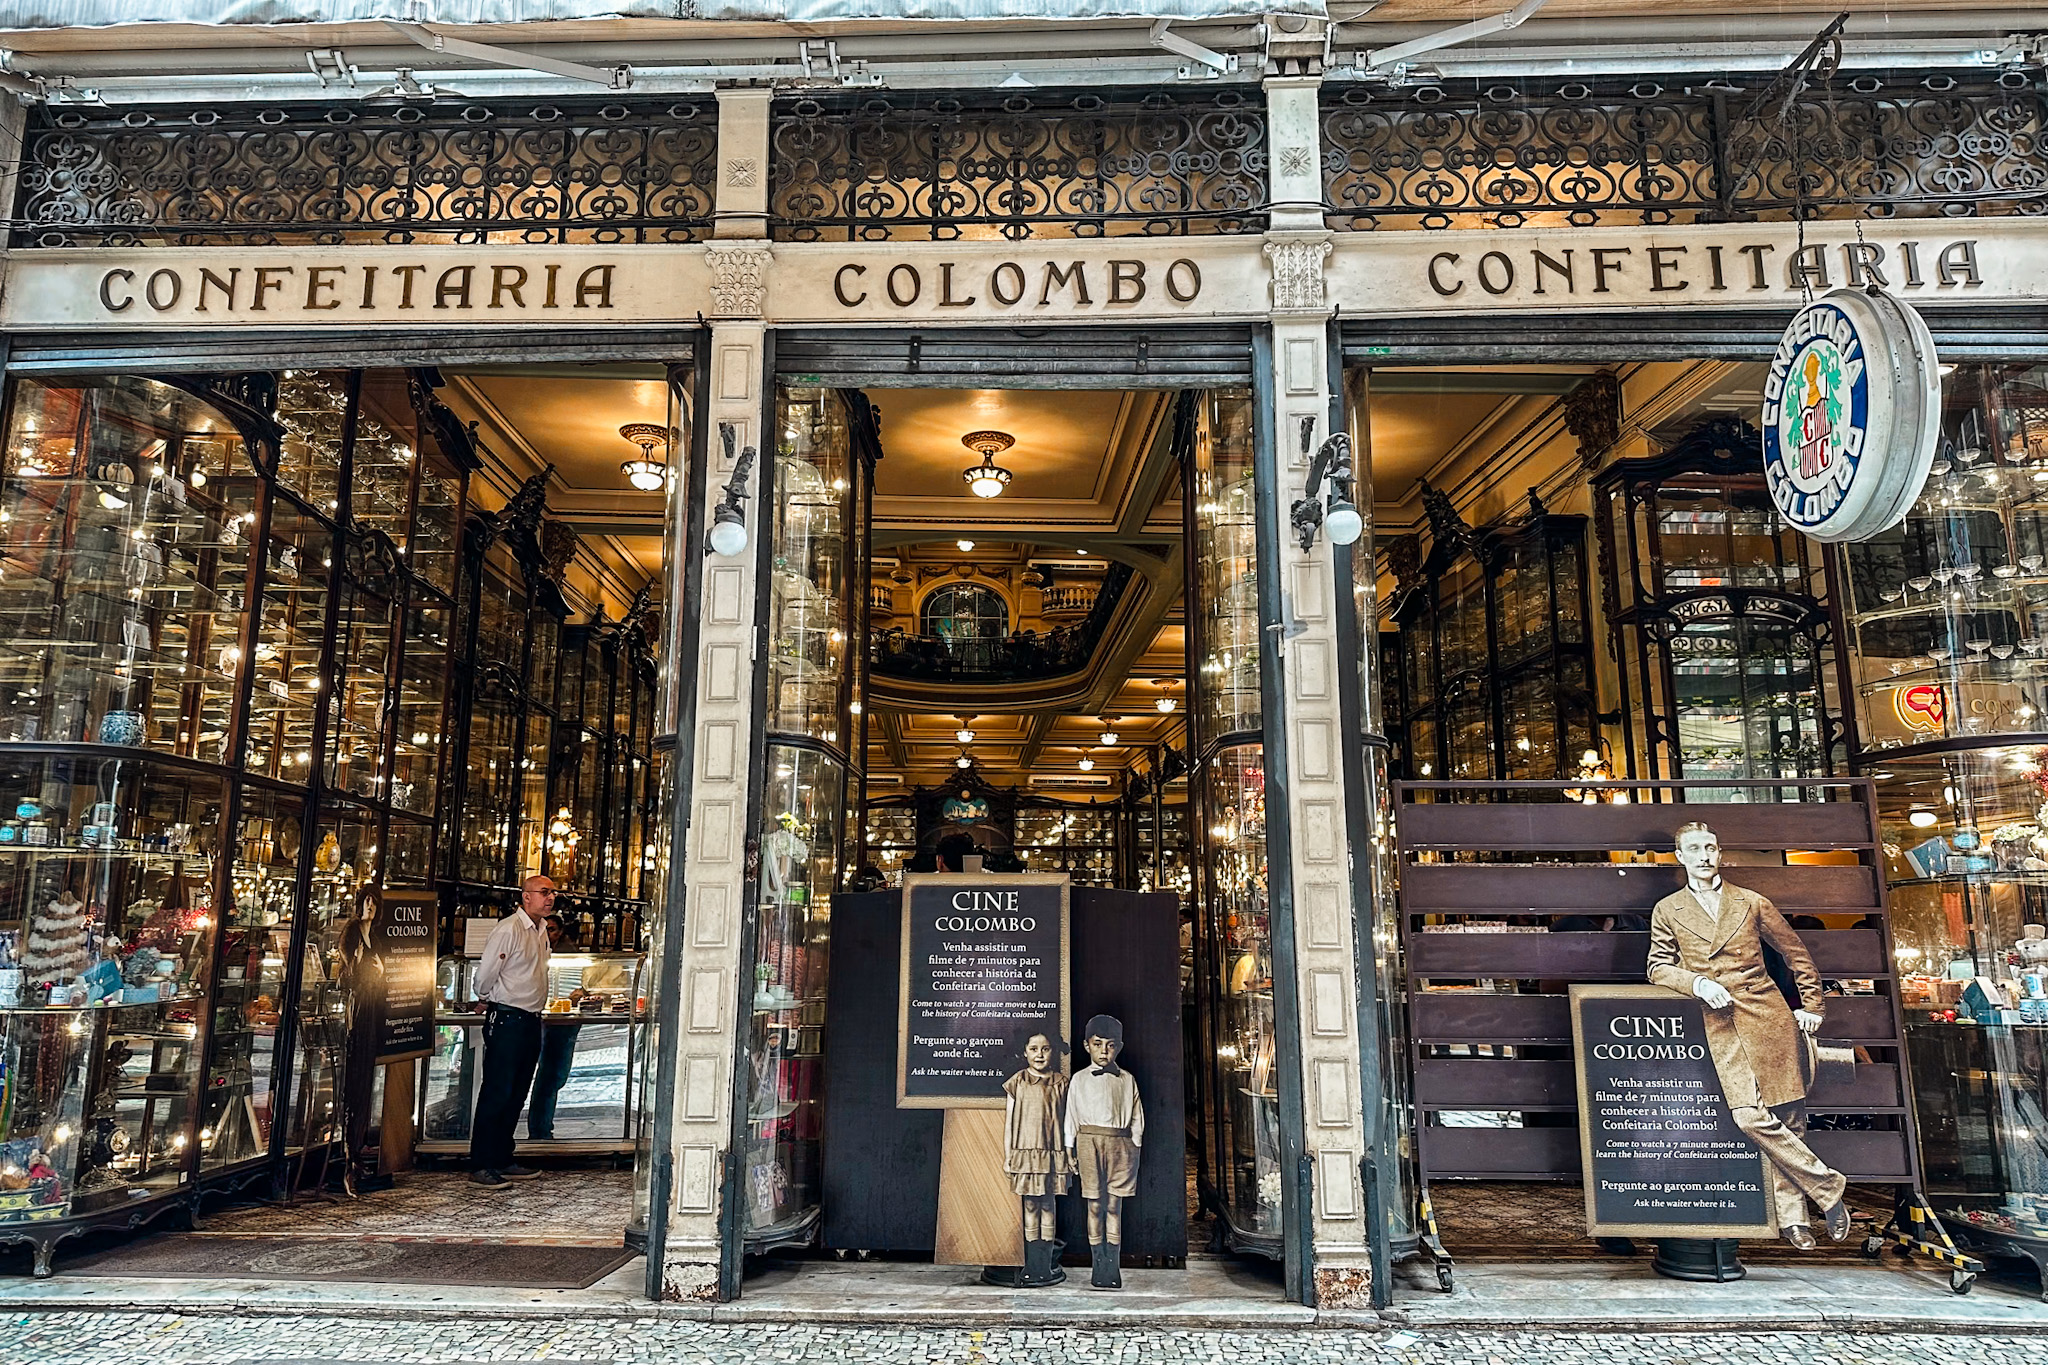 Things to do in Rio: Savor fresh pastries in the Colombo Confeteria